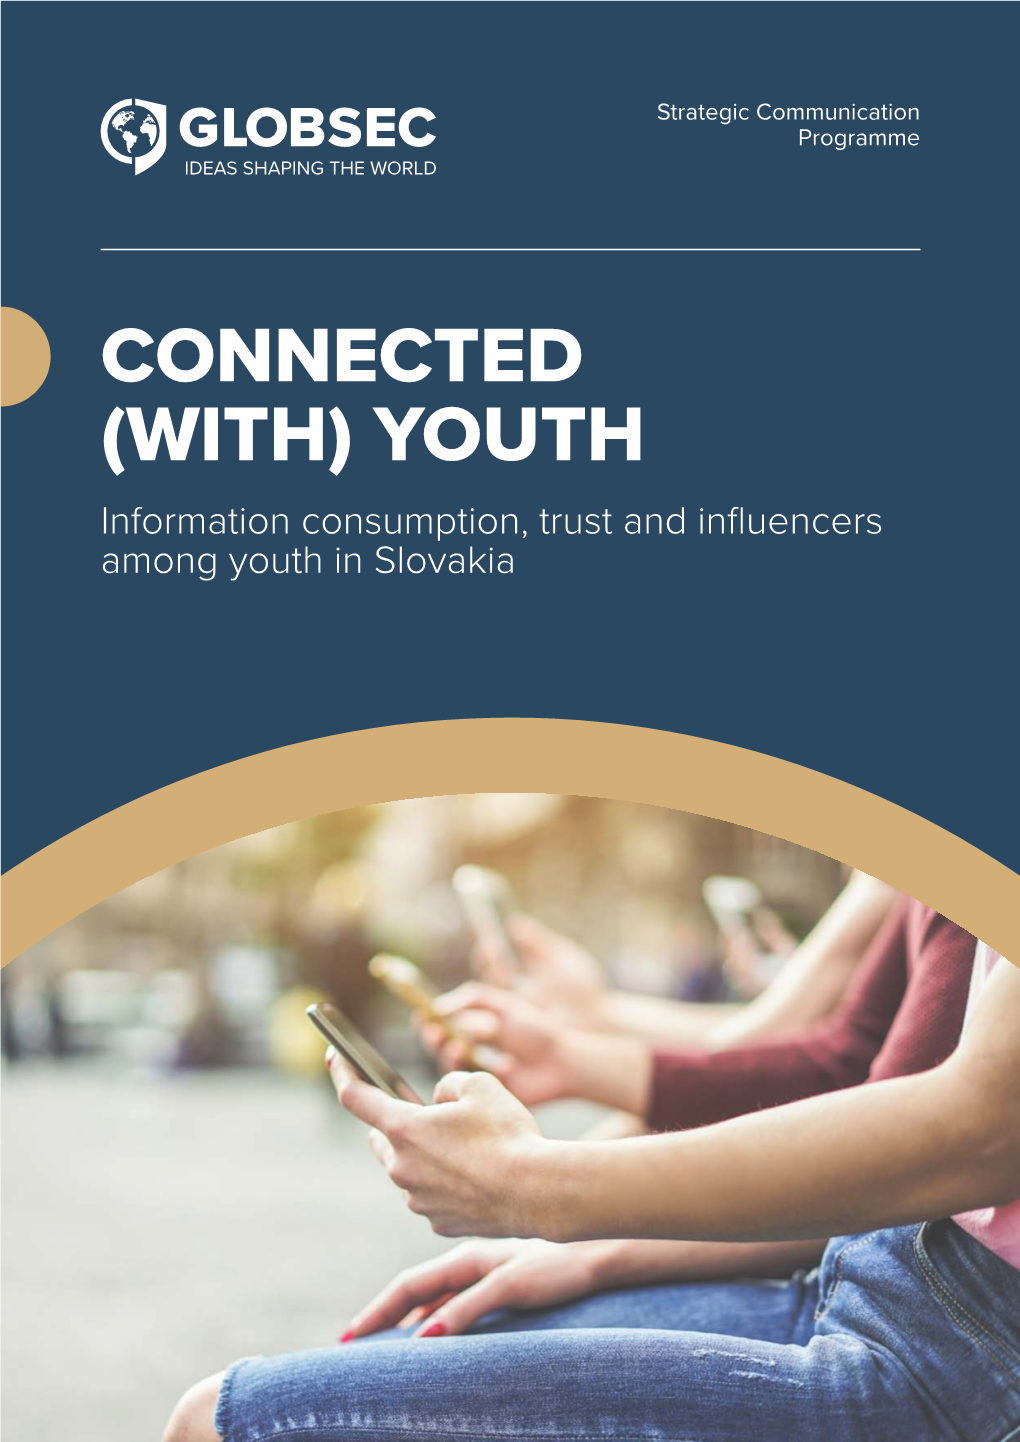 CONNECTED (WITH) YOUTH Information Consumption, Trust and Influencers Among Youth in Slovakia 02 CONNECTED (WITH) YOUTH CONNECTED (WITH) YOUTH 03